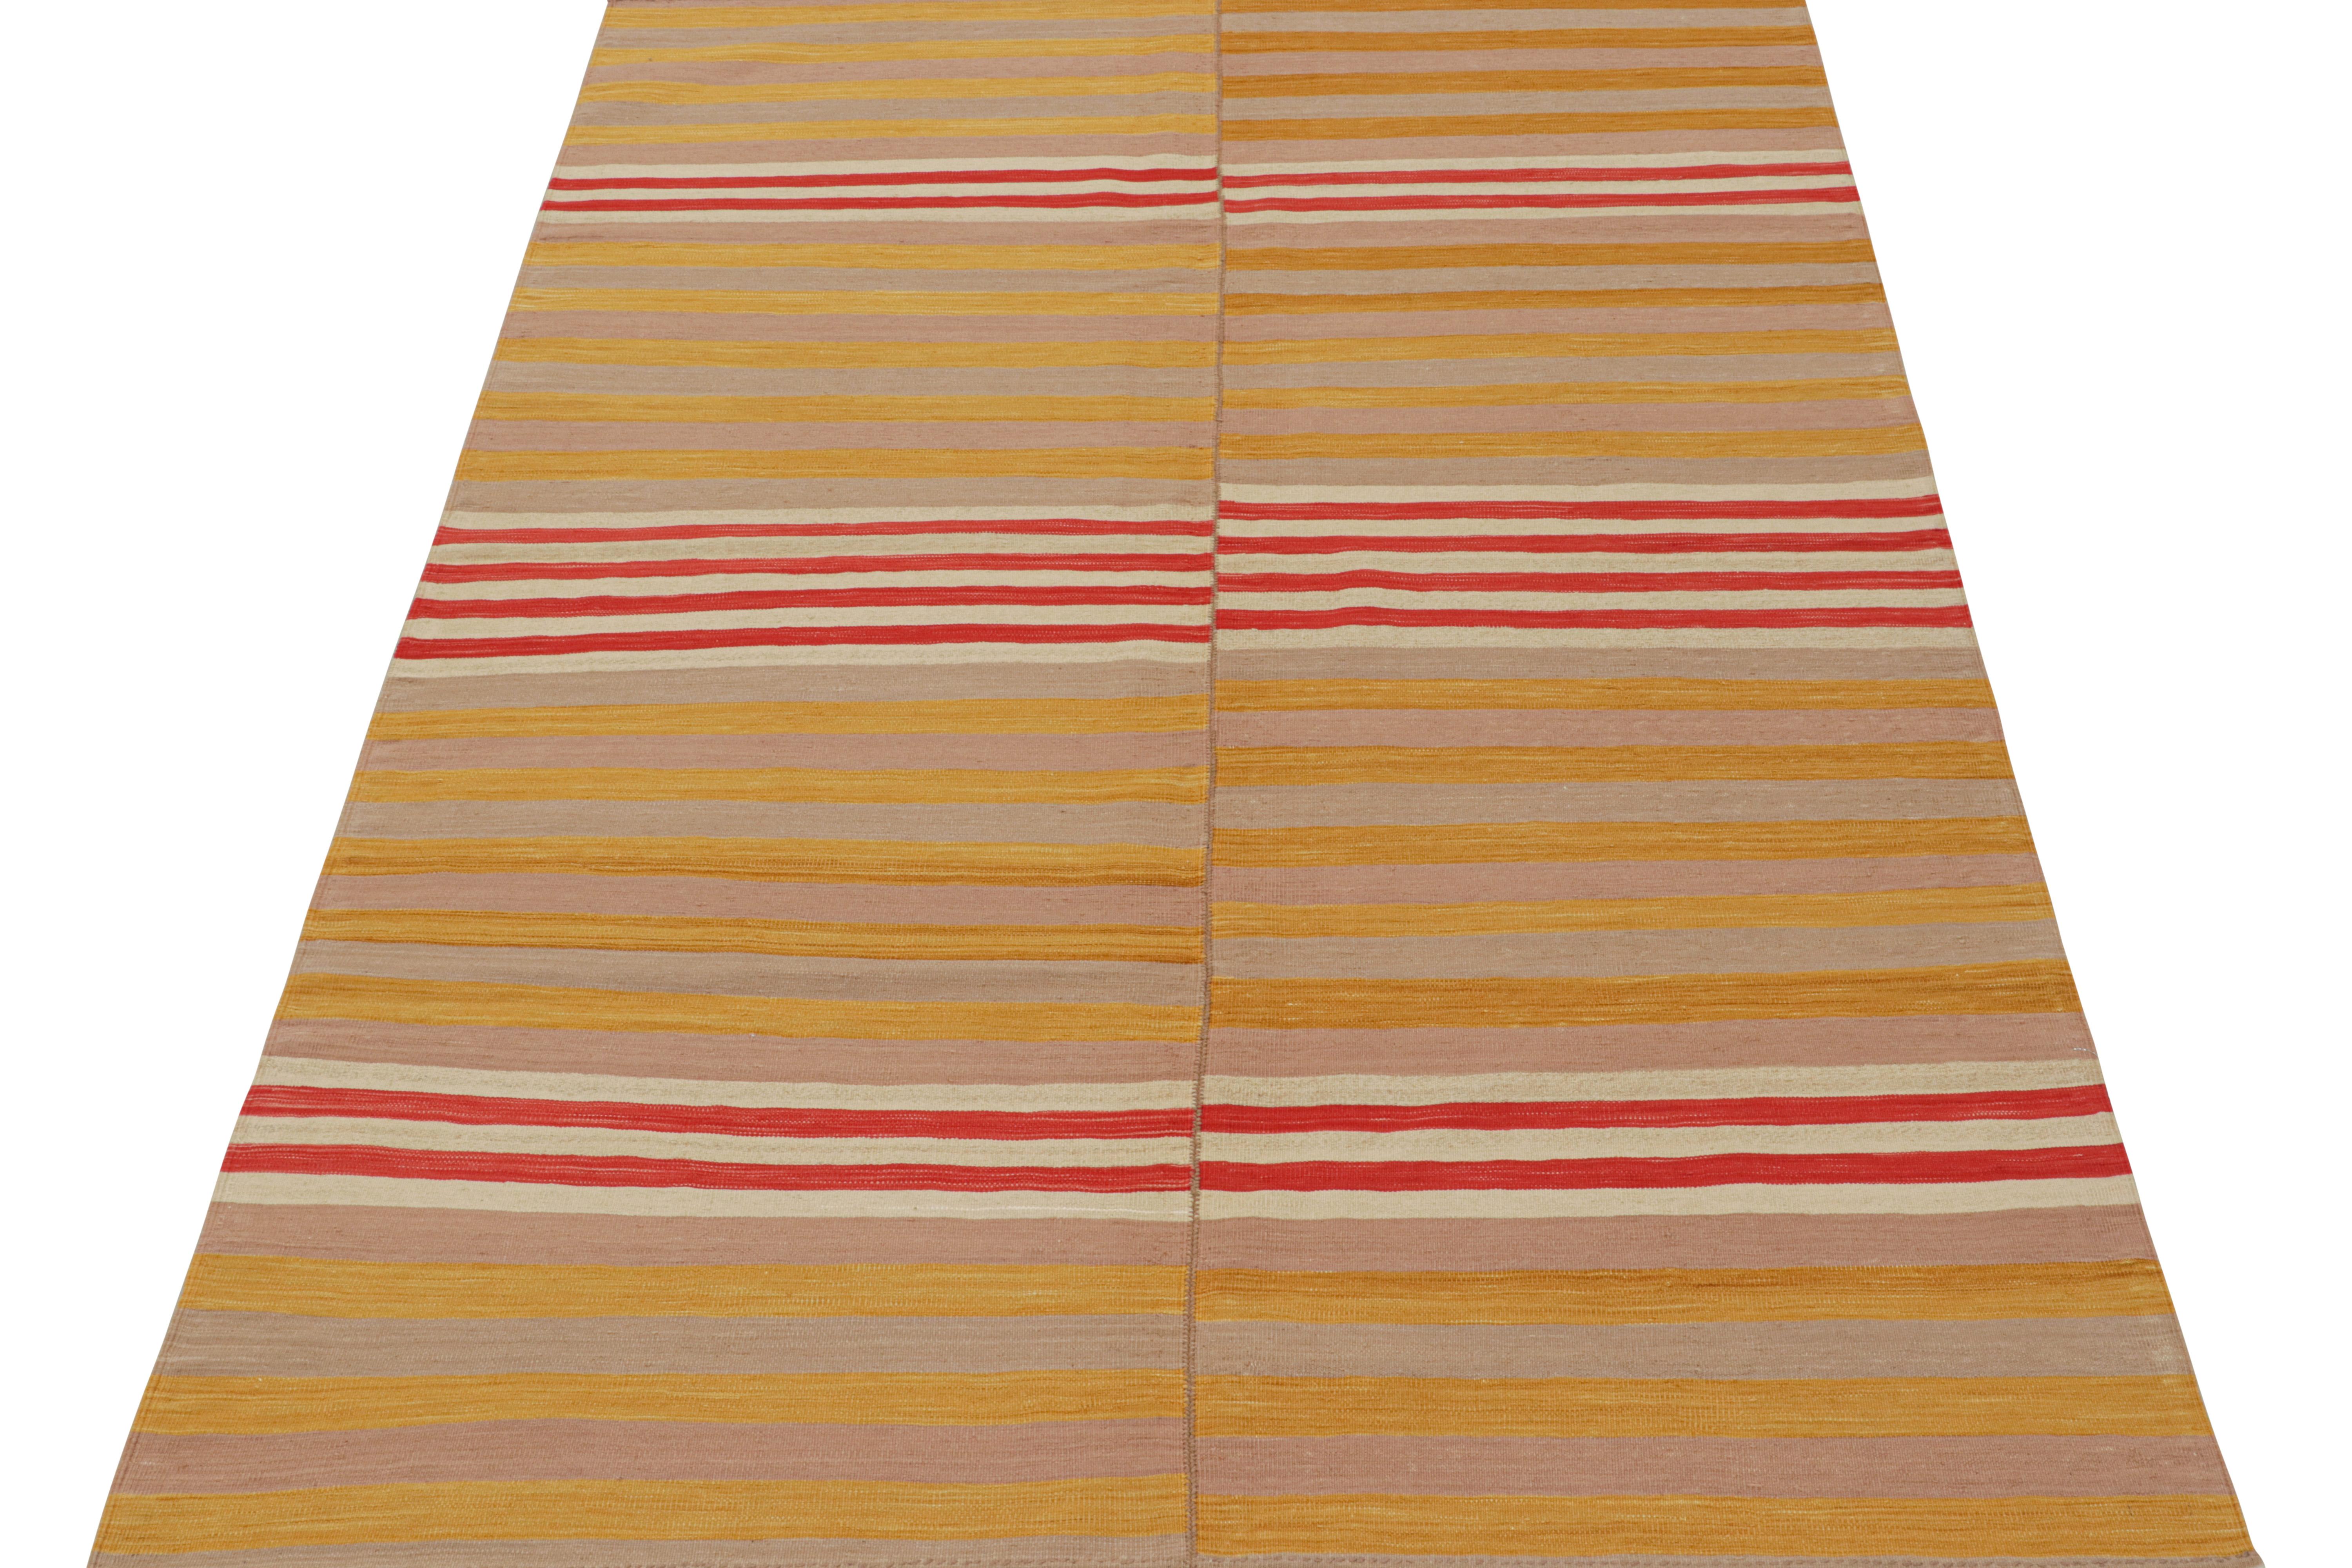 This vintage 6x8 kilim is a mid-century rug that originates from Turkey—handwoven in wool circa 1950-1960.

This particular piece is woven from two panels into one piece. Its design favors stripes in a most unusual play of gold and red one seldom